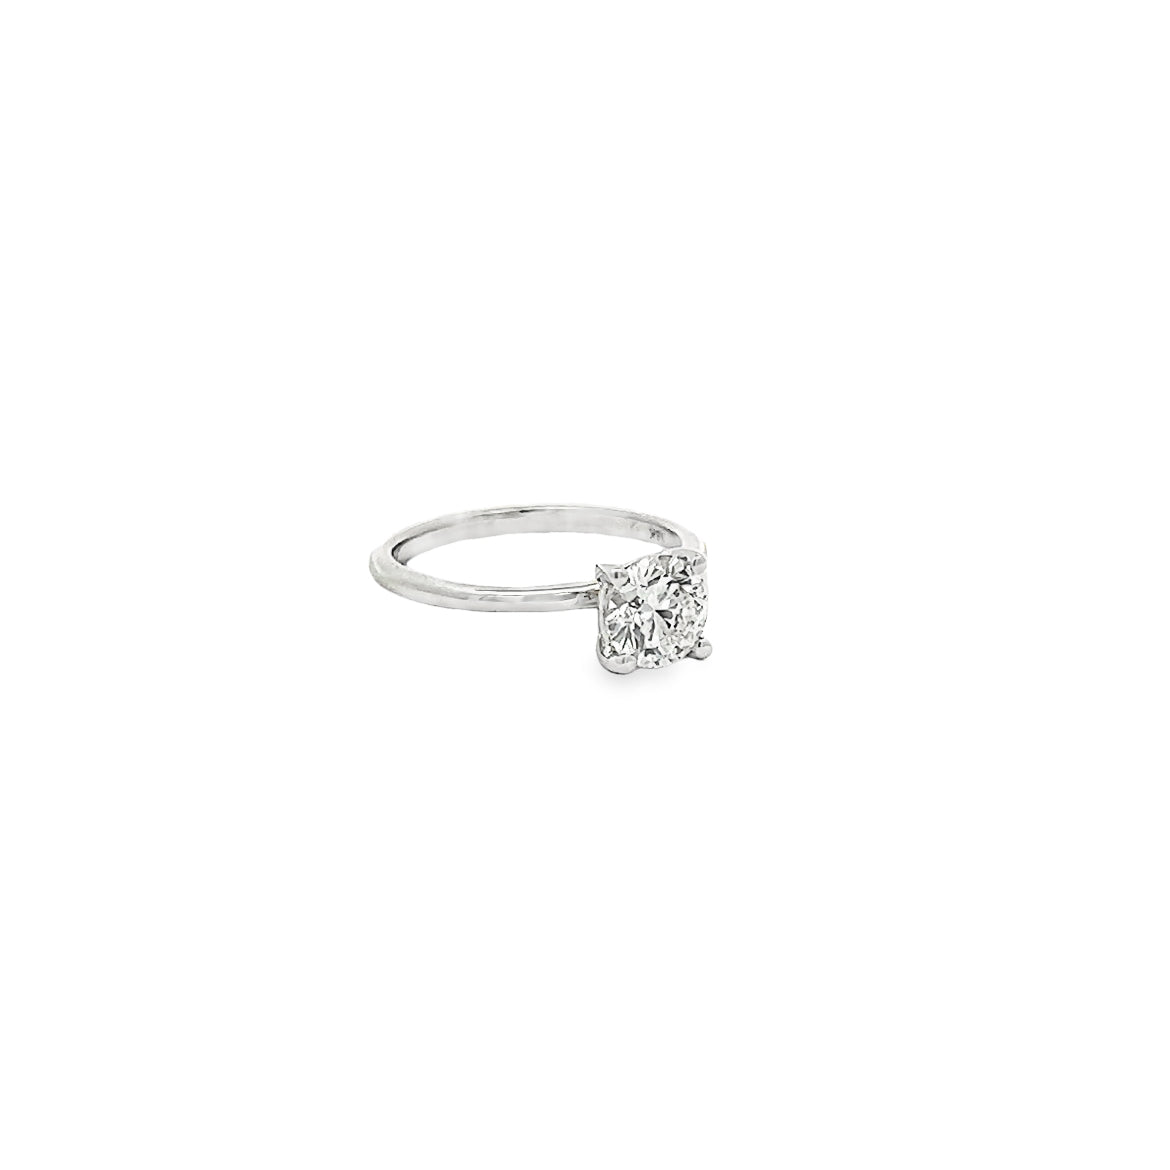 The 1974 18K White Gold Round Solitaire Engagement Ring